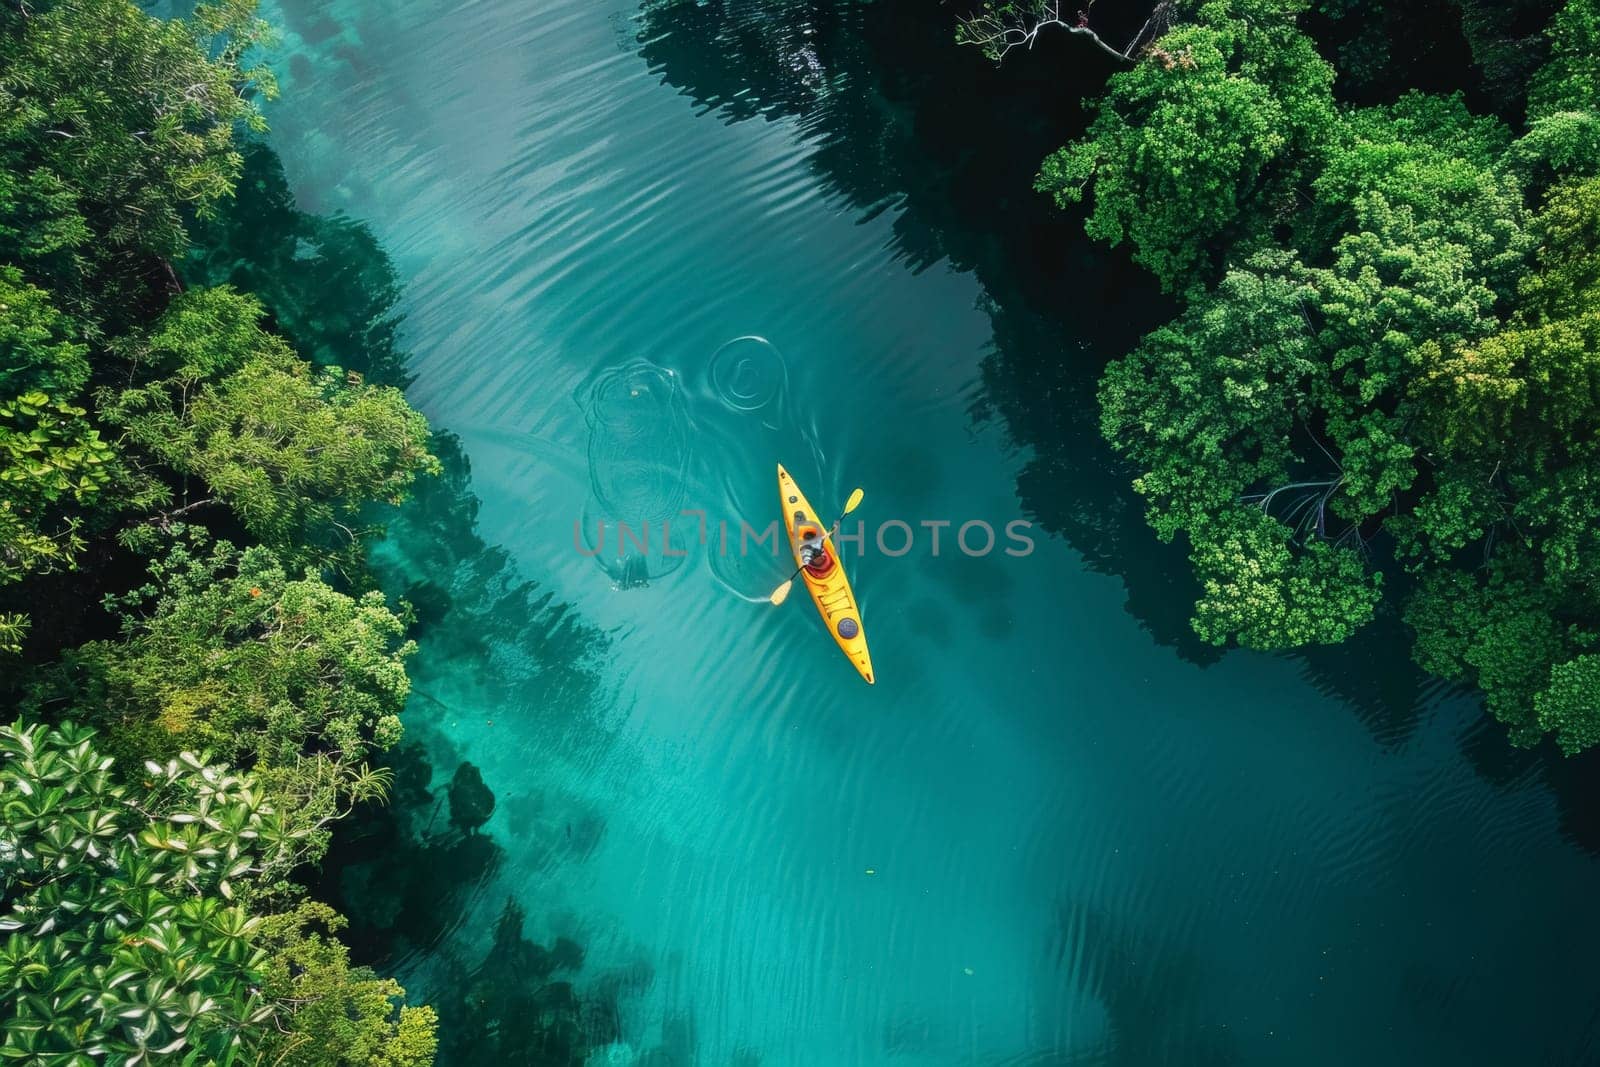 A vibrant kayak slices through the azure waters of a lagoon, surrounded by lush greenery and towering cliffs, an adventure in paradise.